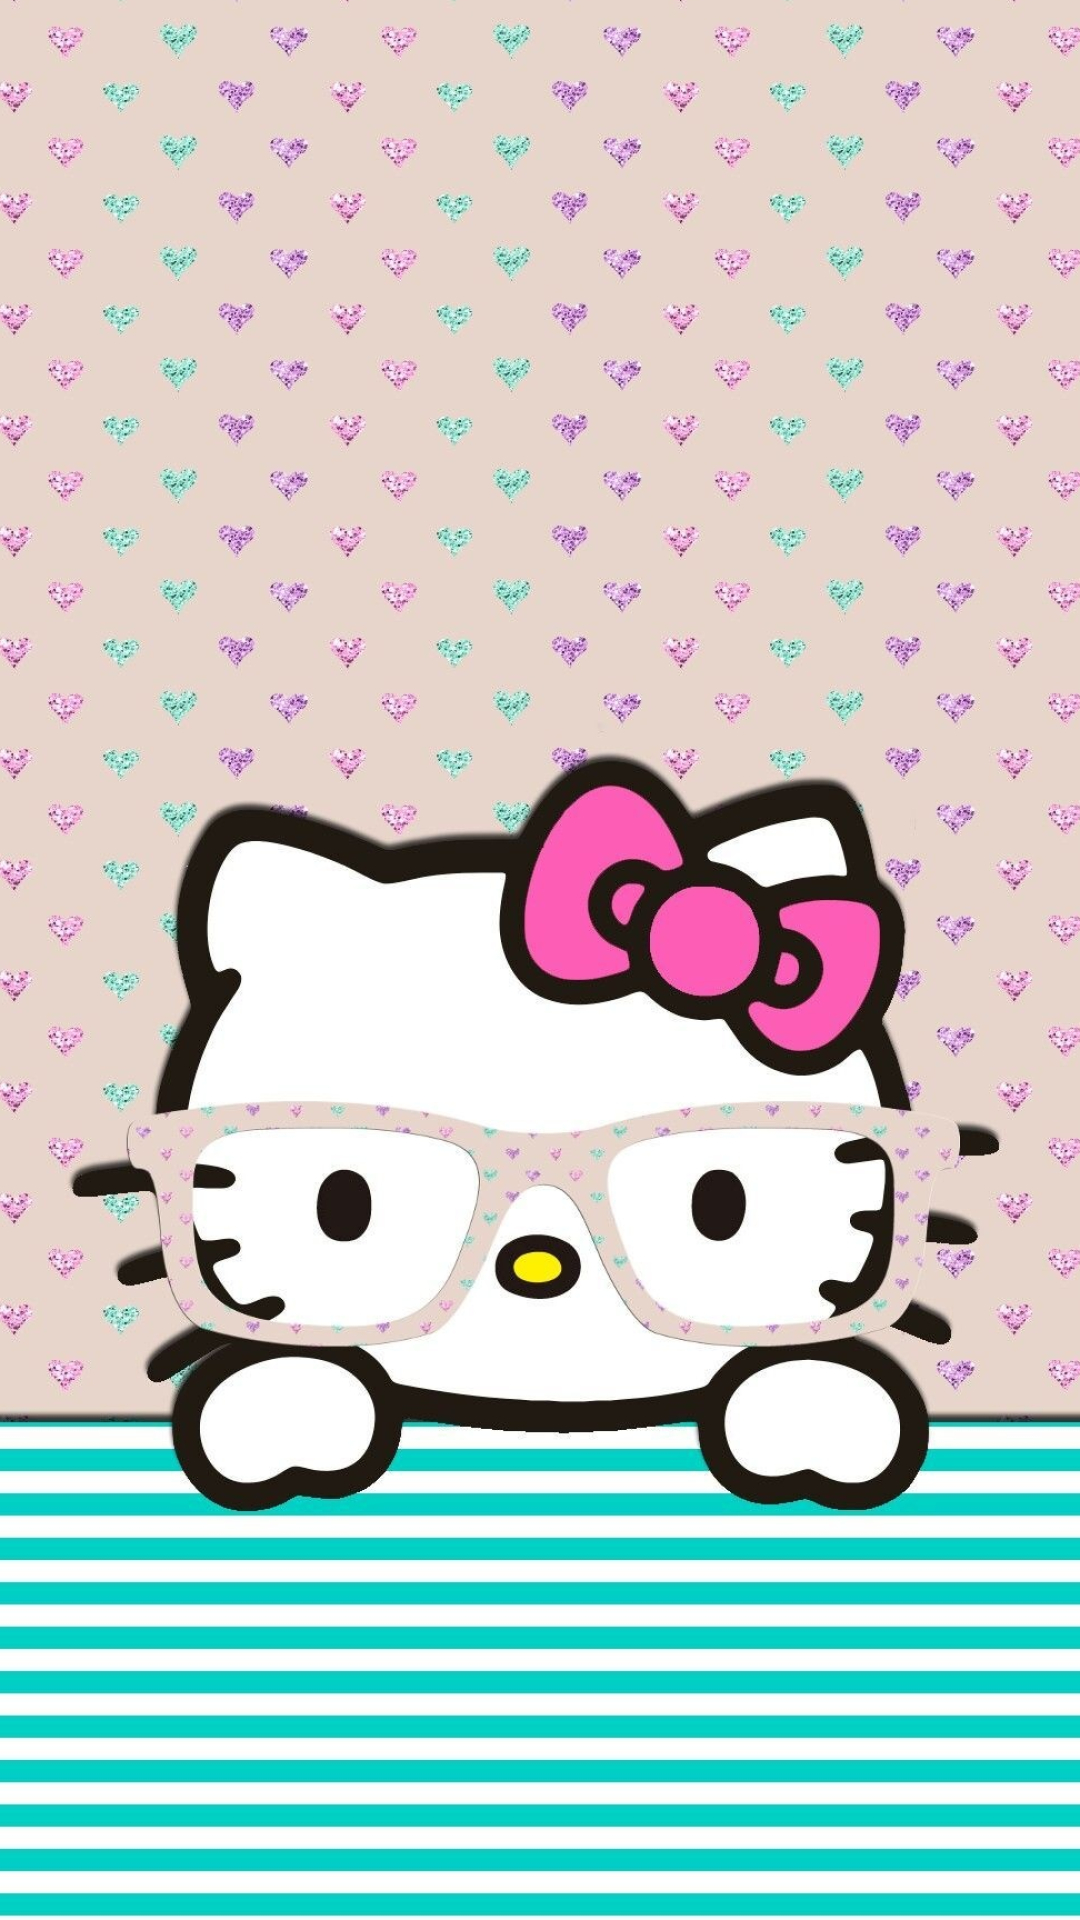 Hello Kitty Nerd, Adorable wallpapers, Nerd fashion, Cute and nerdy, 1080x1920 Full HD Phone